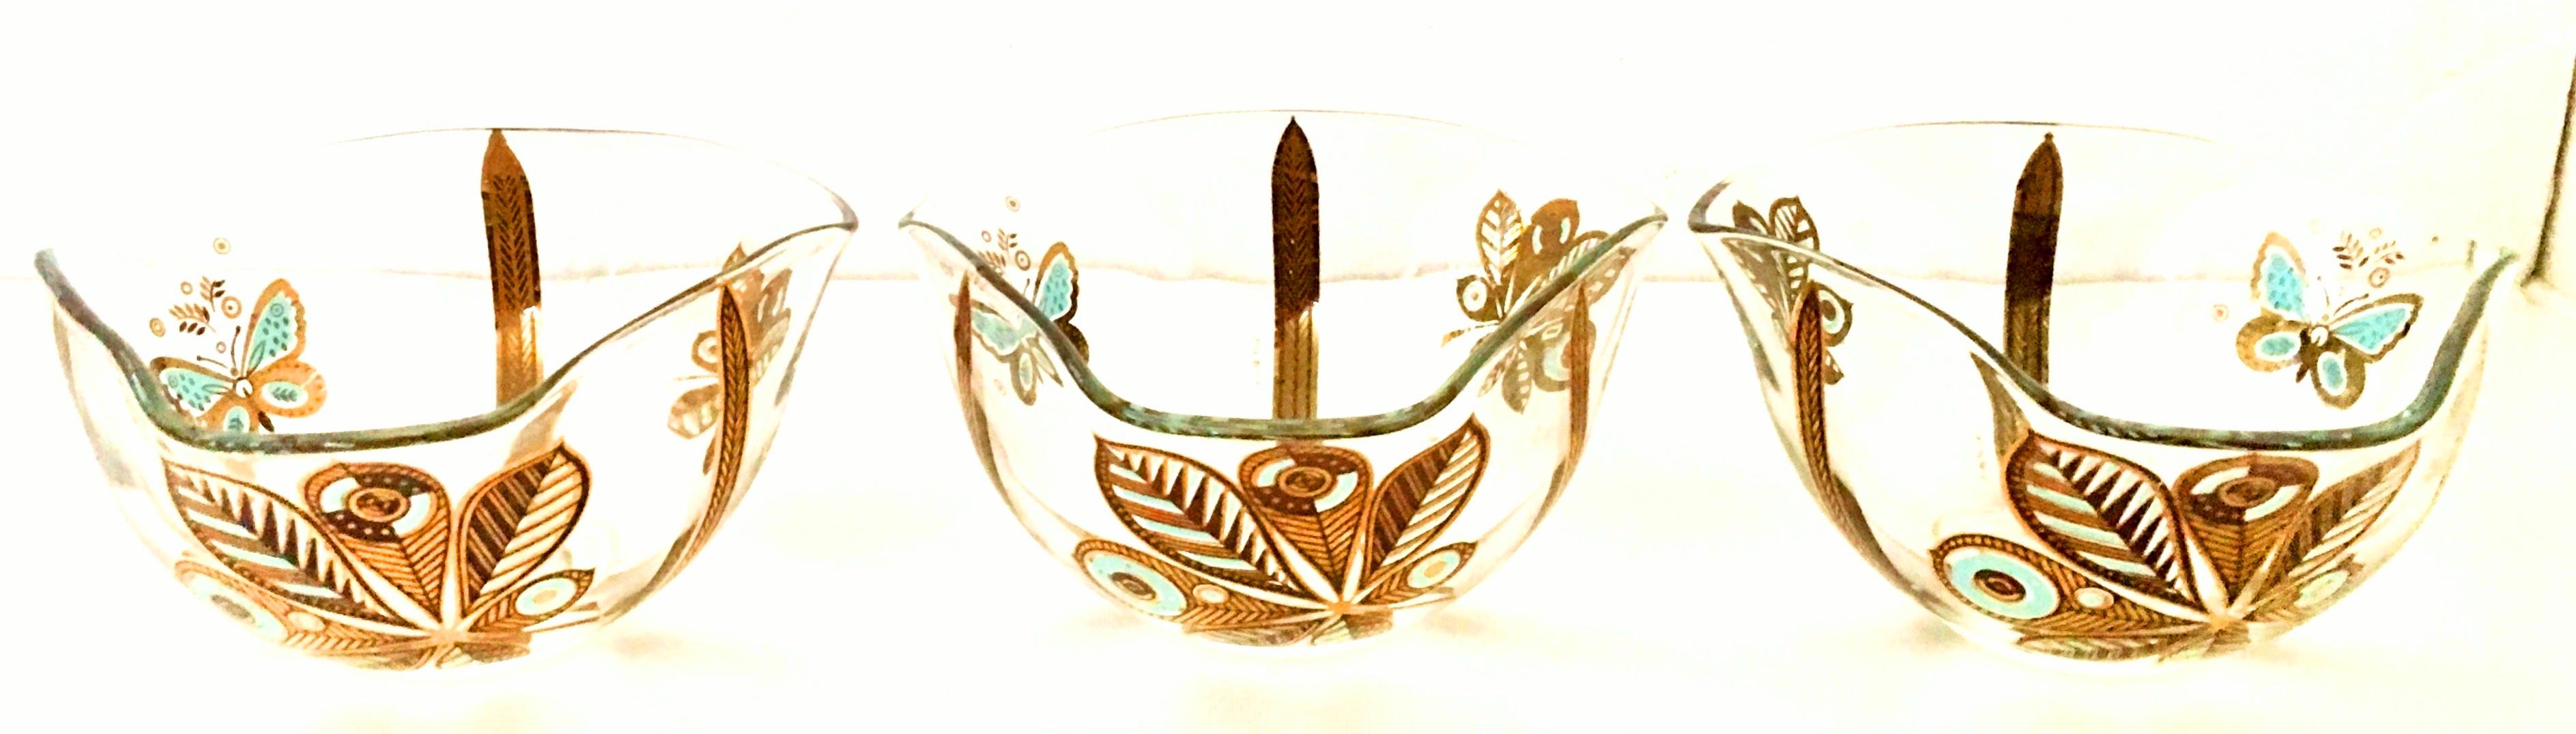 20th century Hollywood Regency set of three 22-karat gold and turquoise printed organic form butterfly and fauna motif glass bowls by, Georges Briard. Each piece is signed on the exterior side with the Geroges Briard trademark.